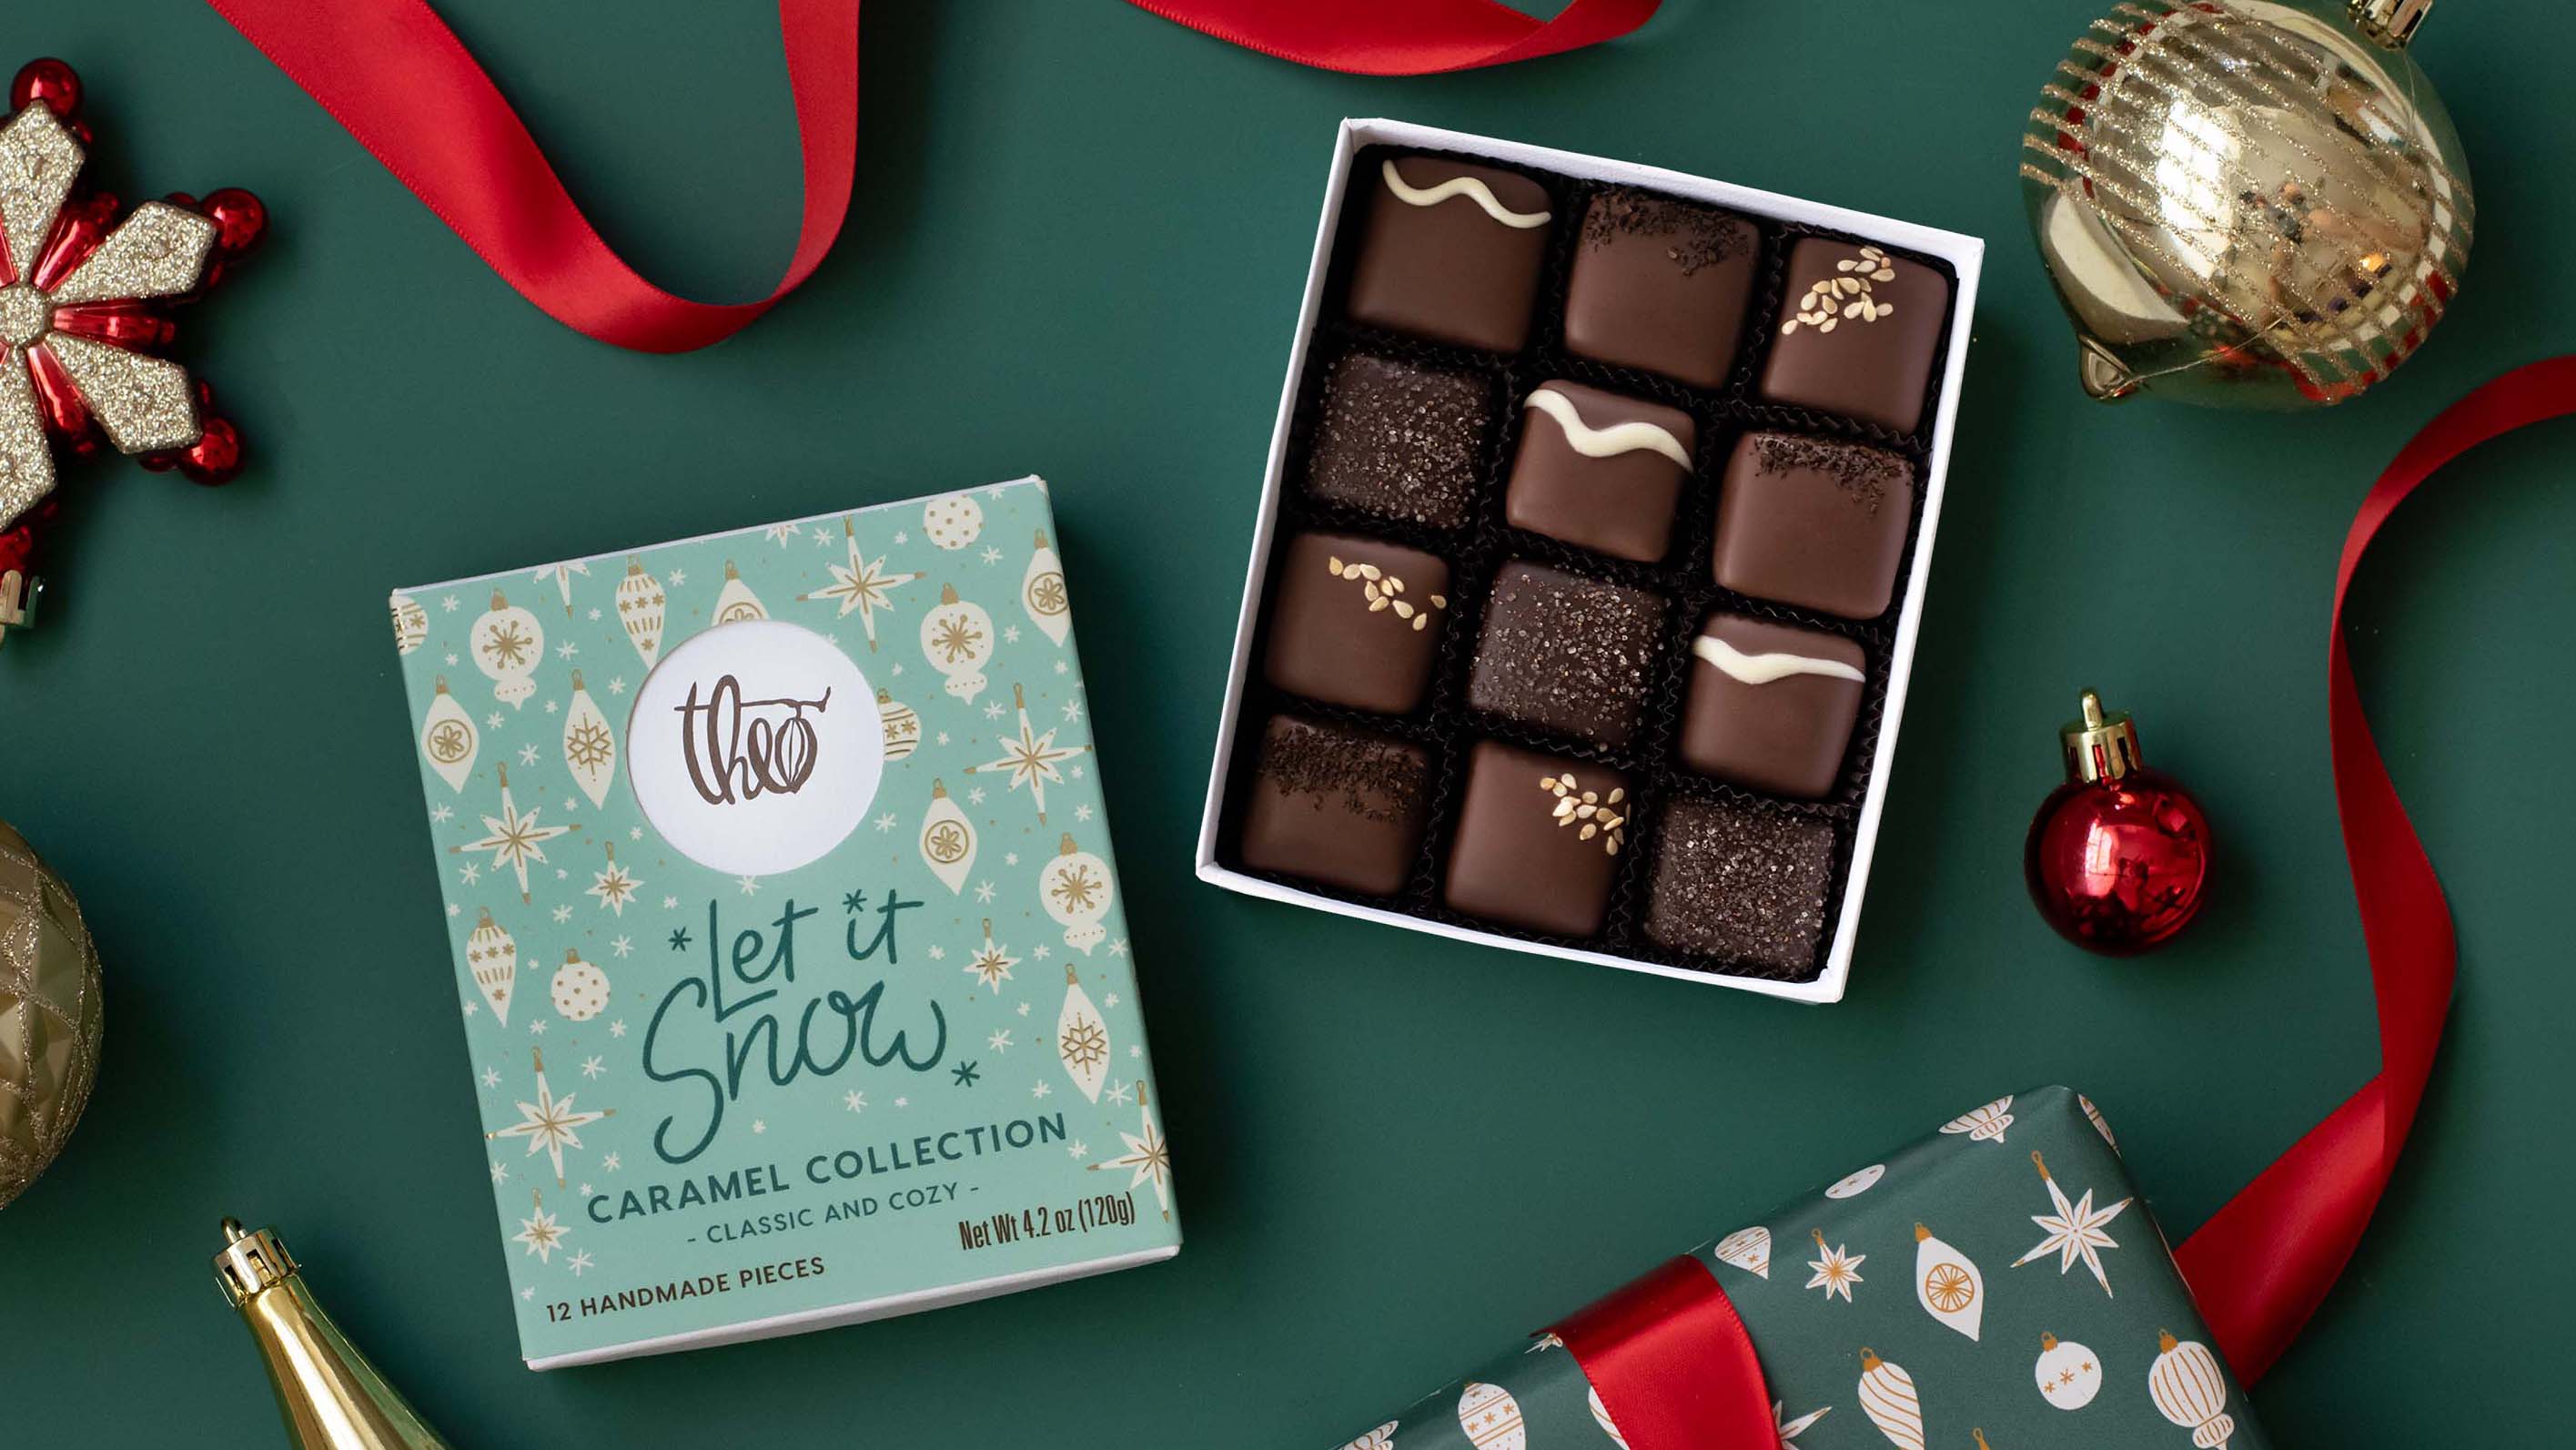 featured image three:Theo Chocolate Let it Snow Caramel Collection Packaging